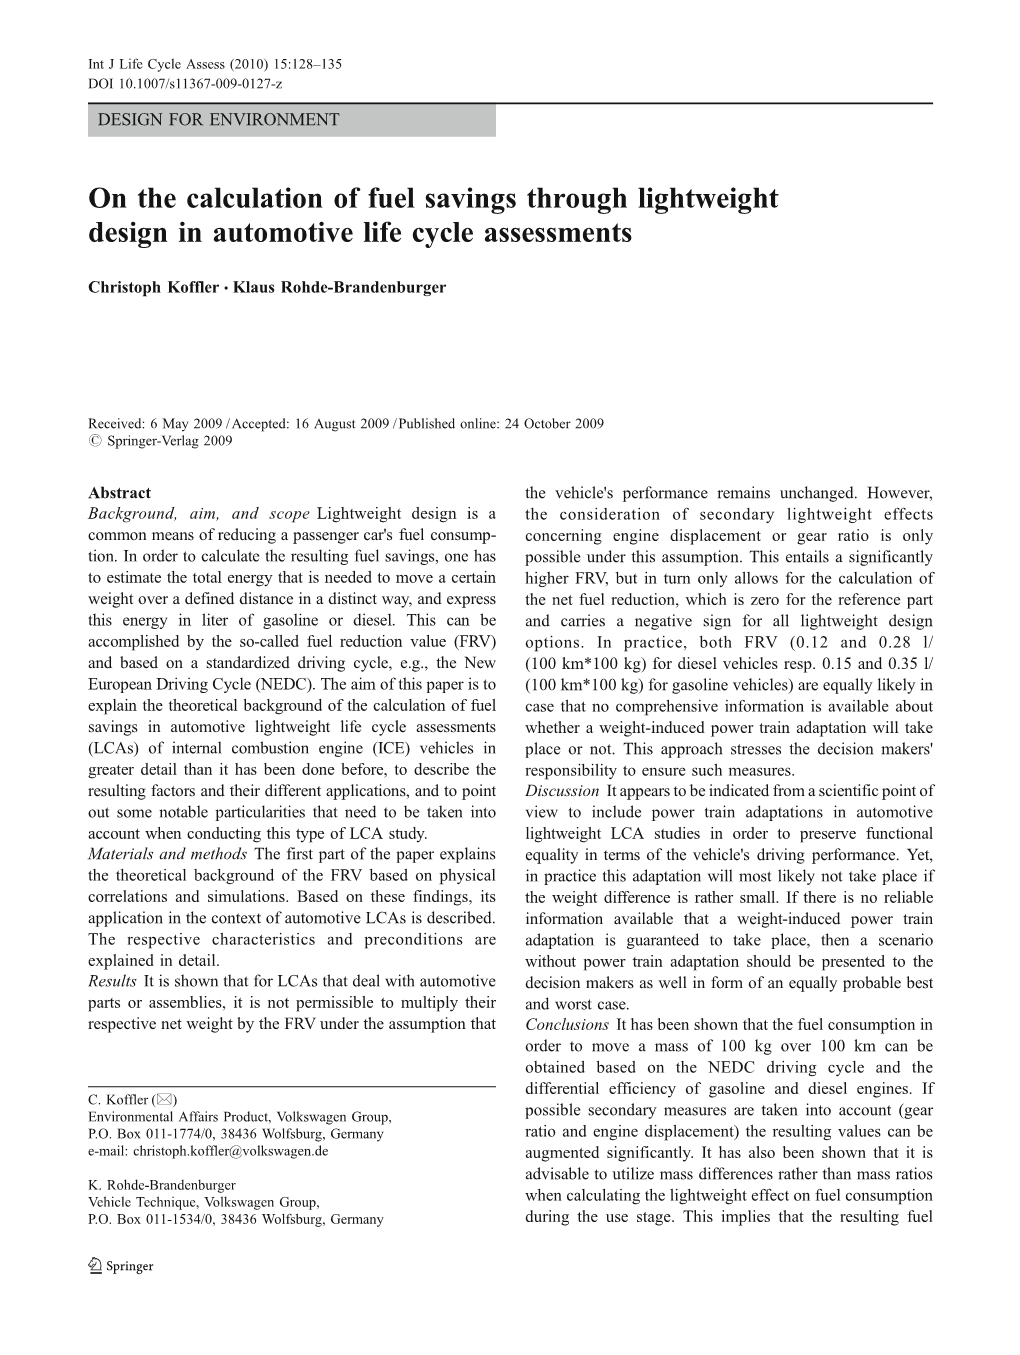 On the Calculation of Fuel Savings Through Lightweight Design in Automotive Life Cycle Assessments